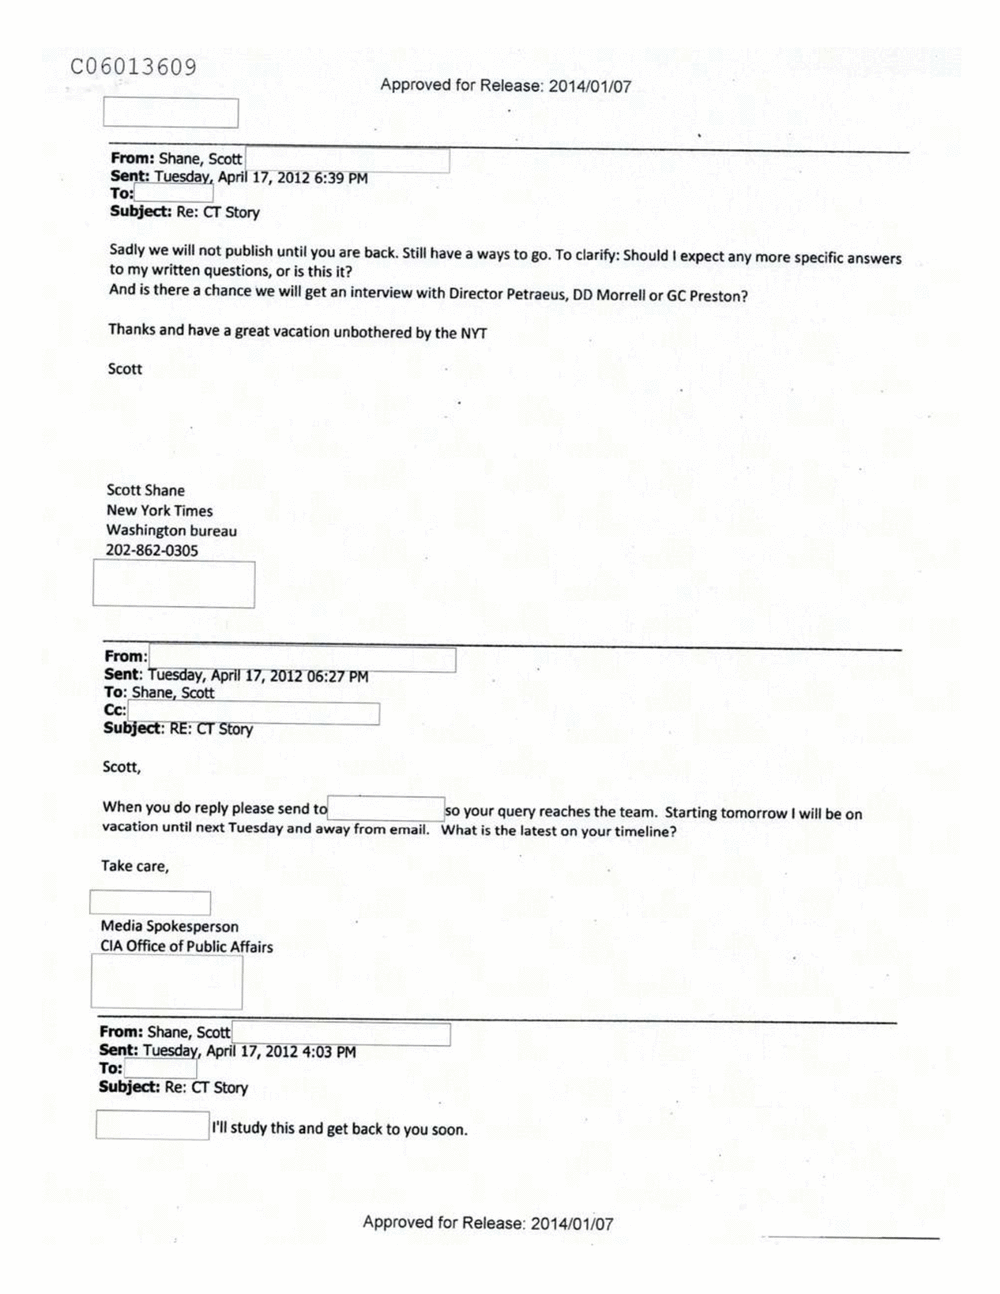 Page 424 from Email Correspondence Between Reporters and CIA Flacks